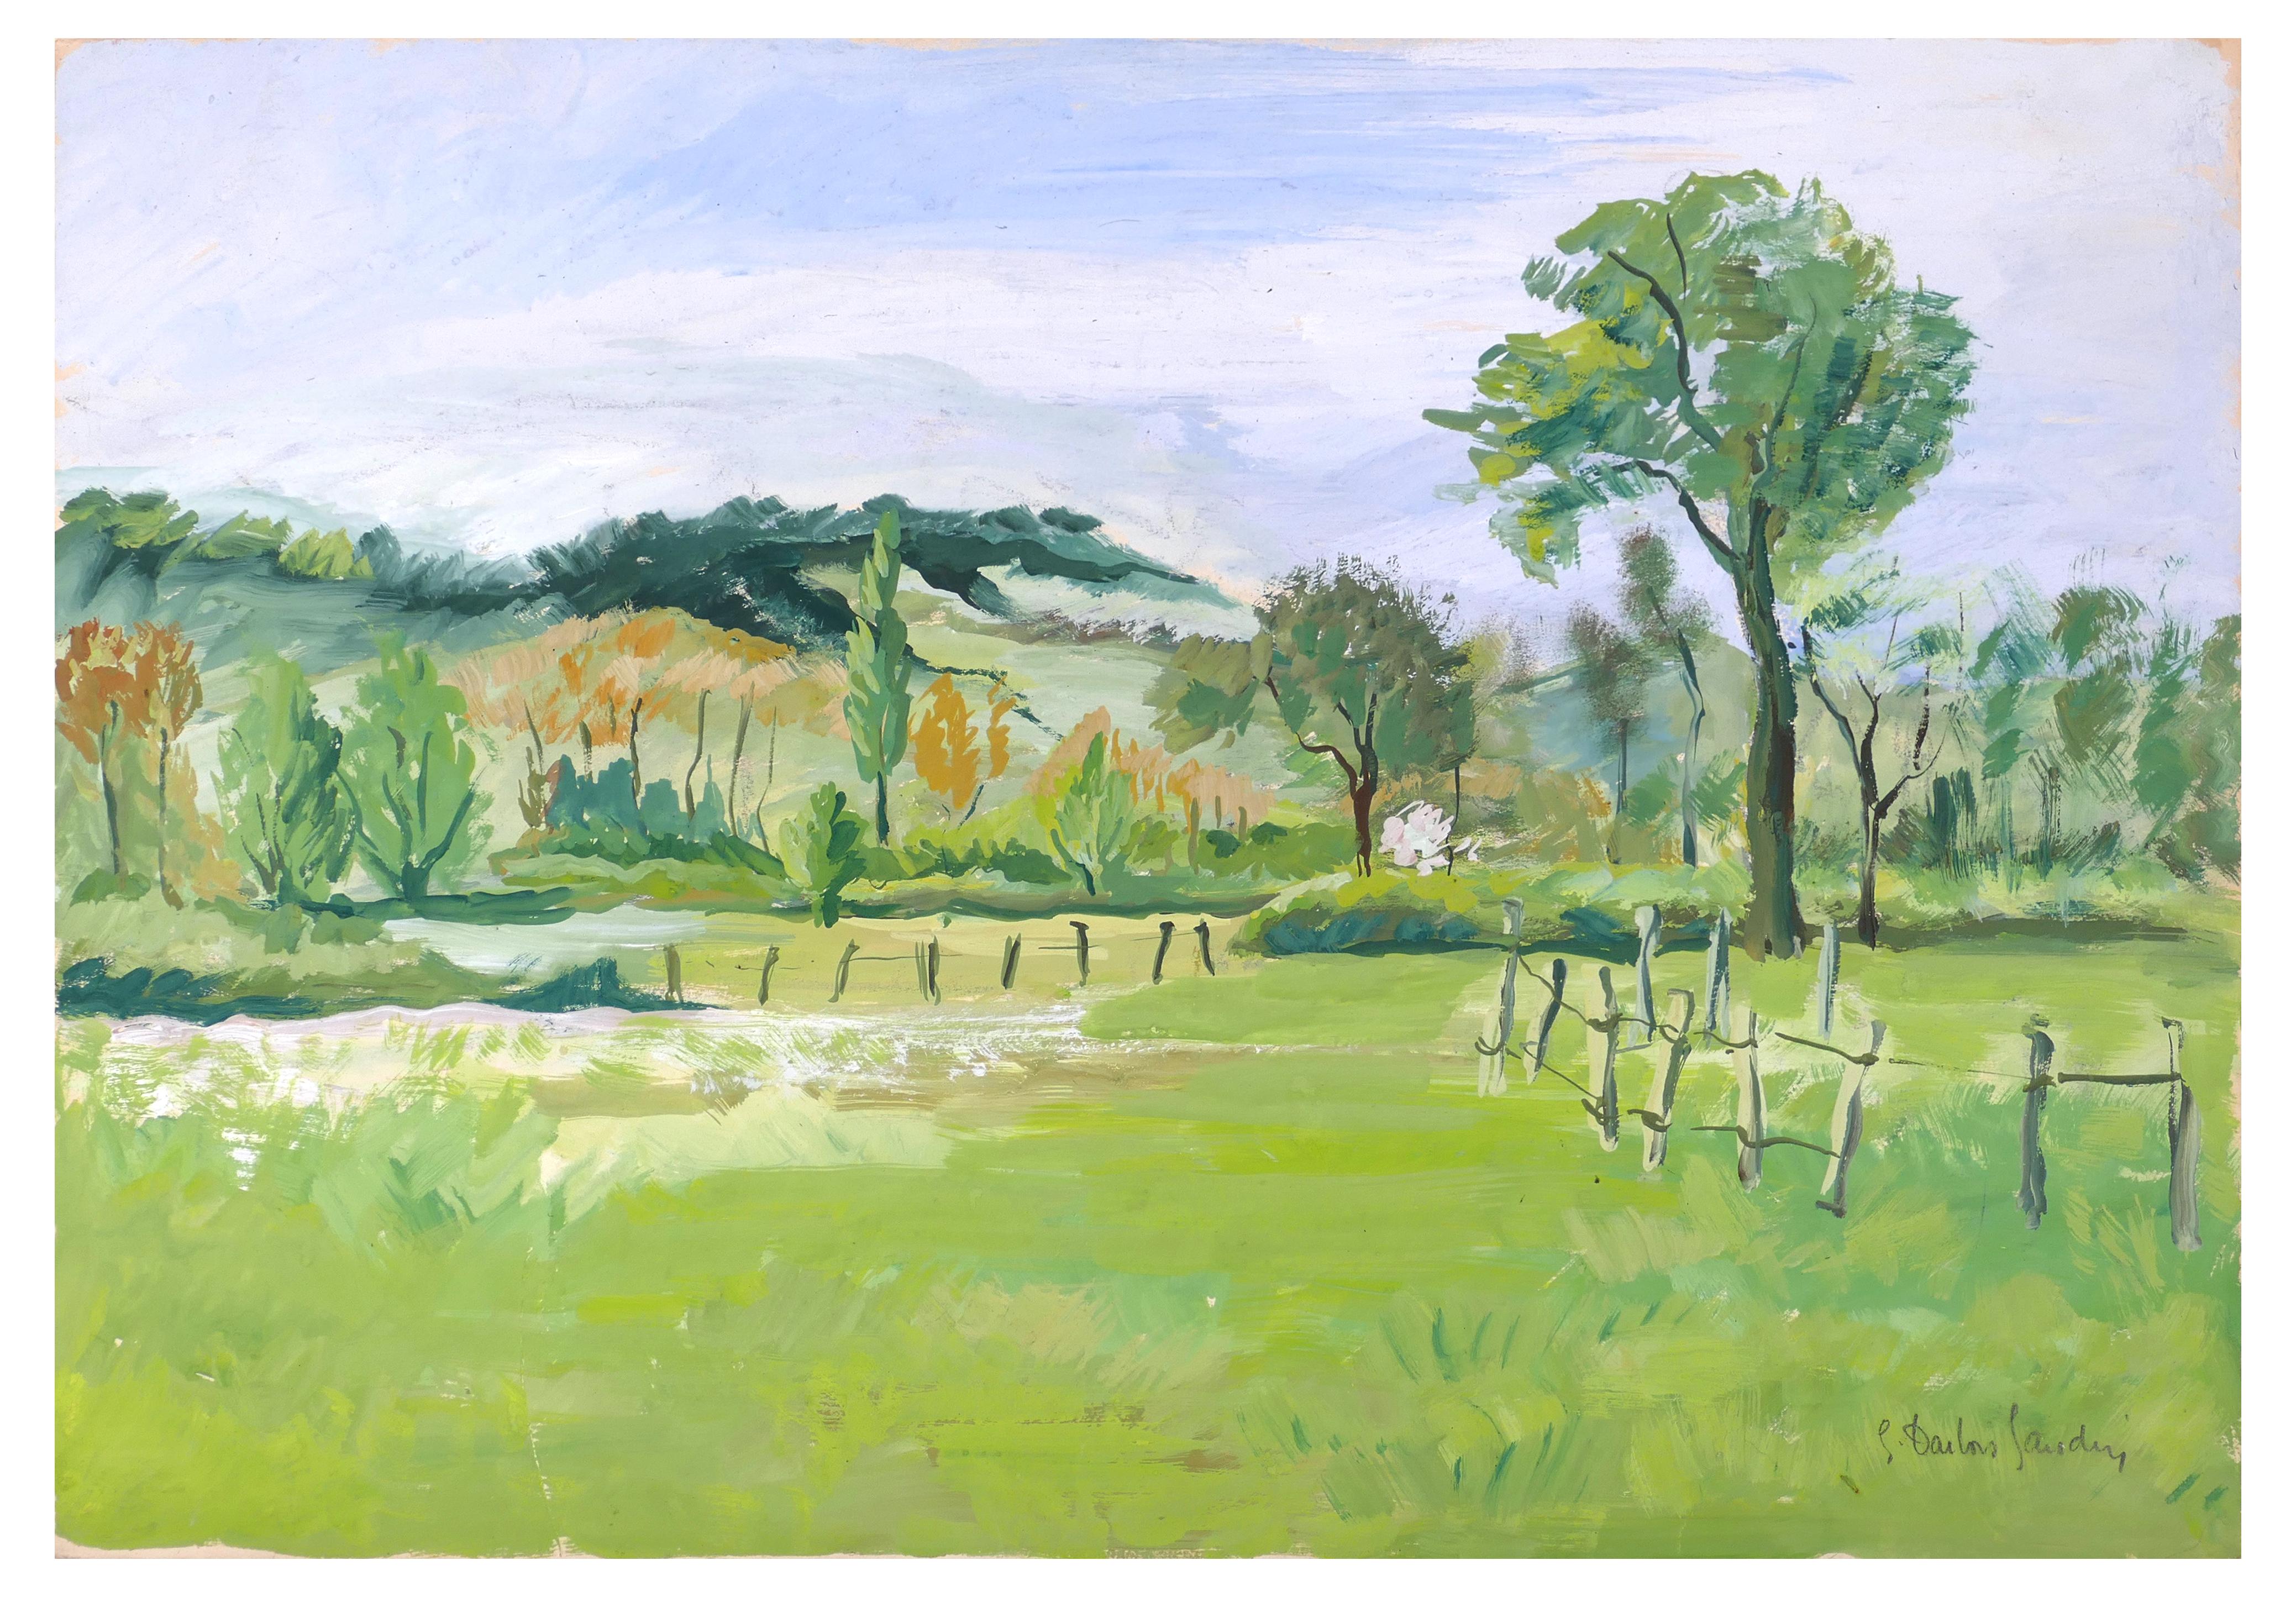 Germaine-Irene Darbois-Gaudin Landscape Painting - Hilly Landscape - Acrylic on Paper by G.-I. Darbois-Gaudin - 1970s